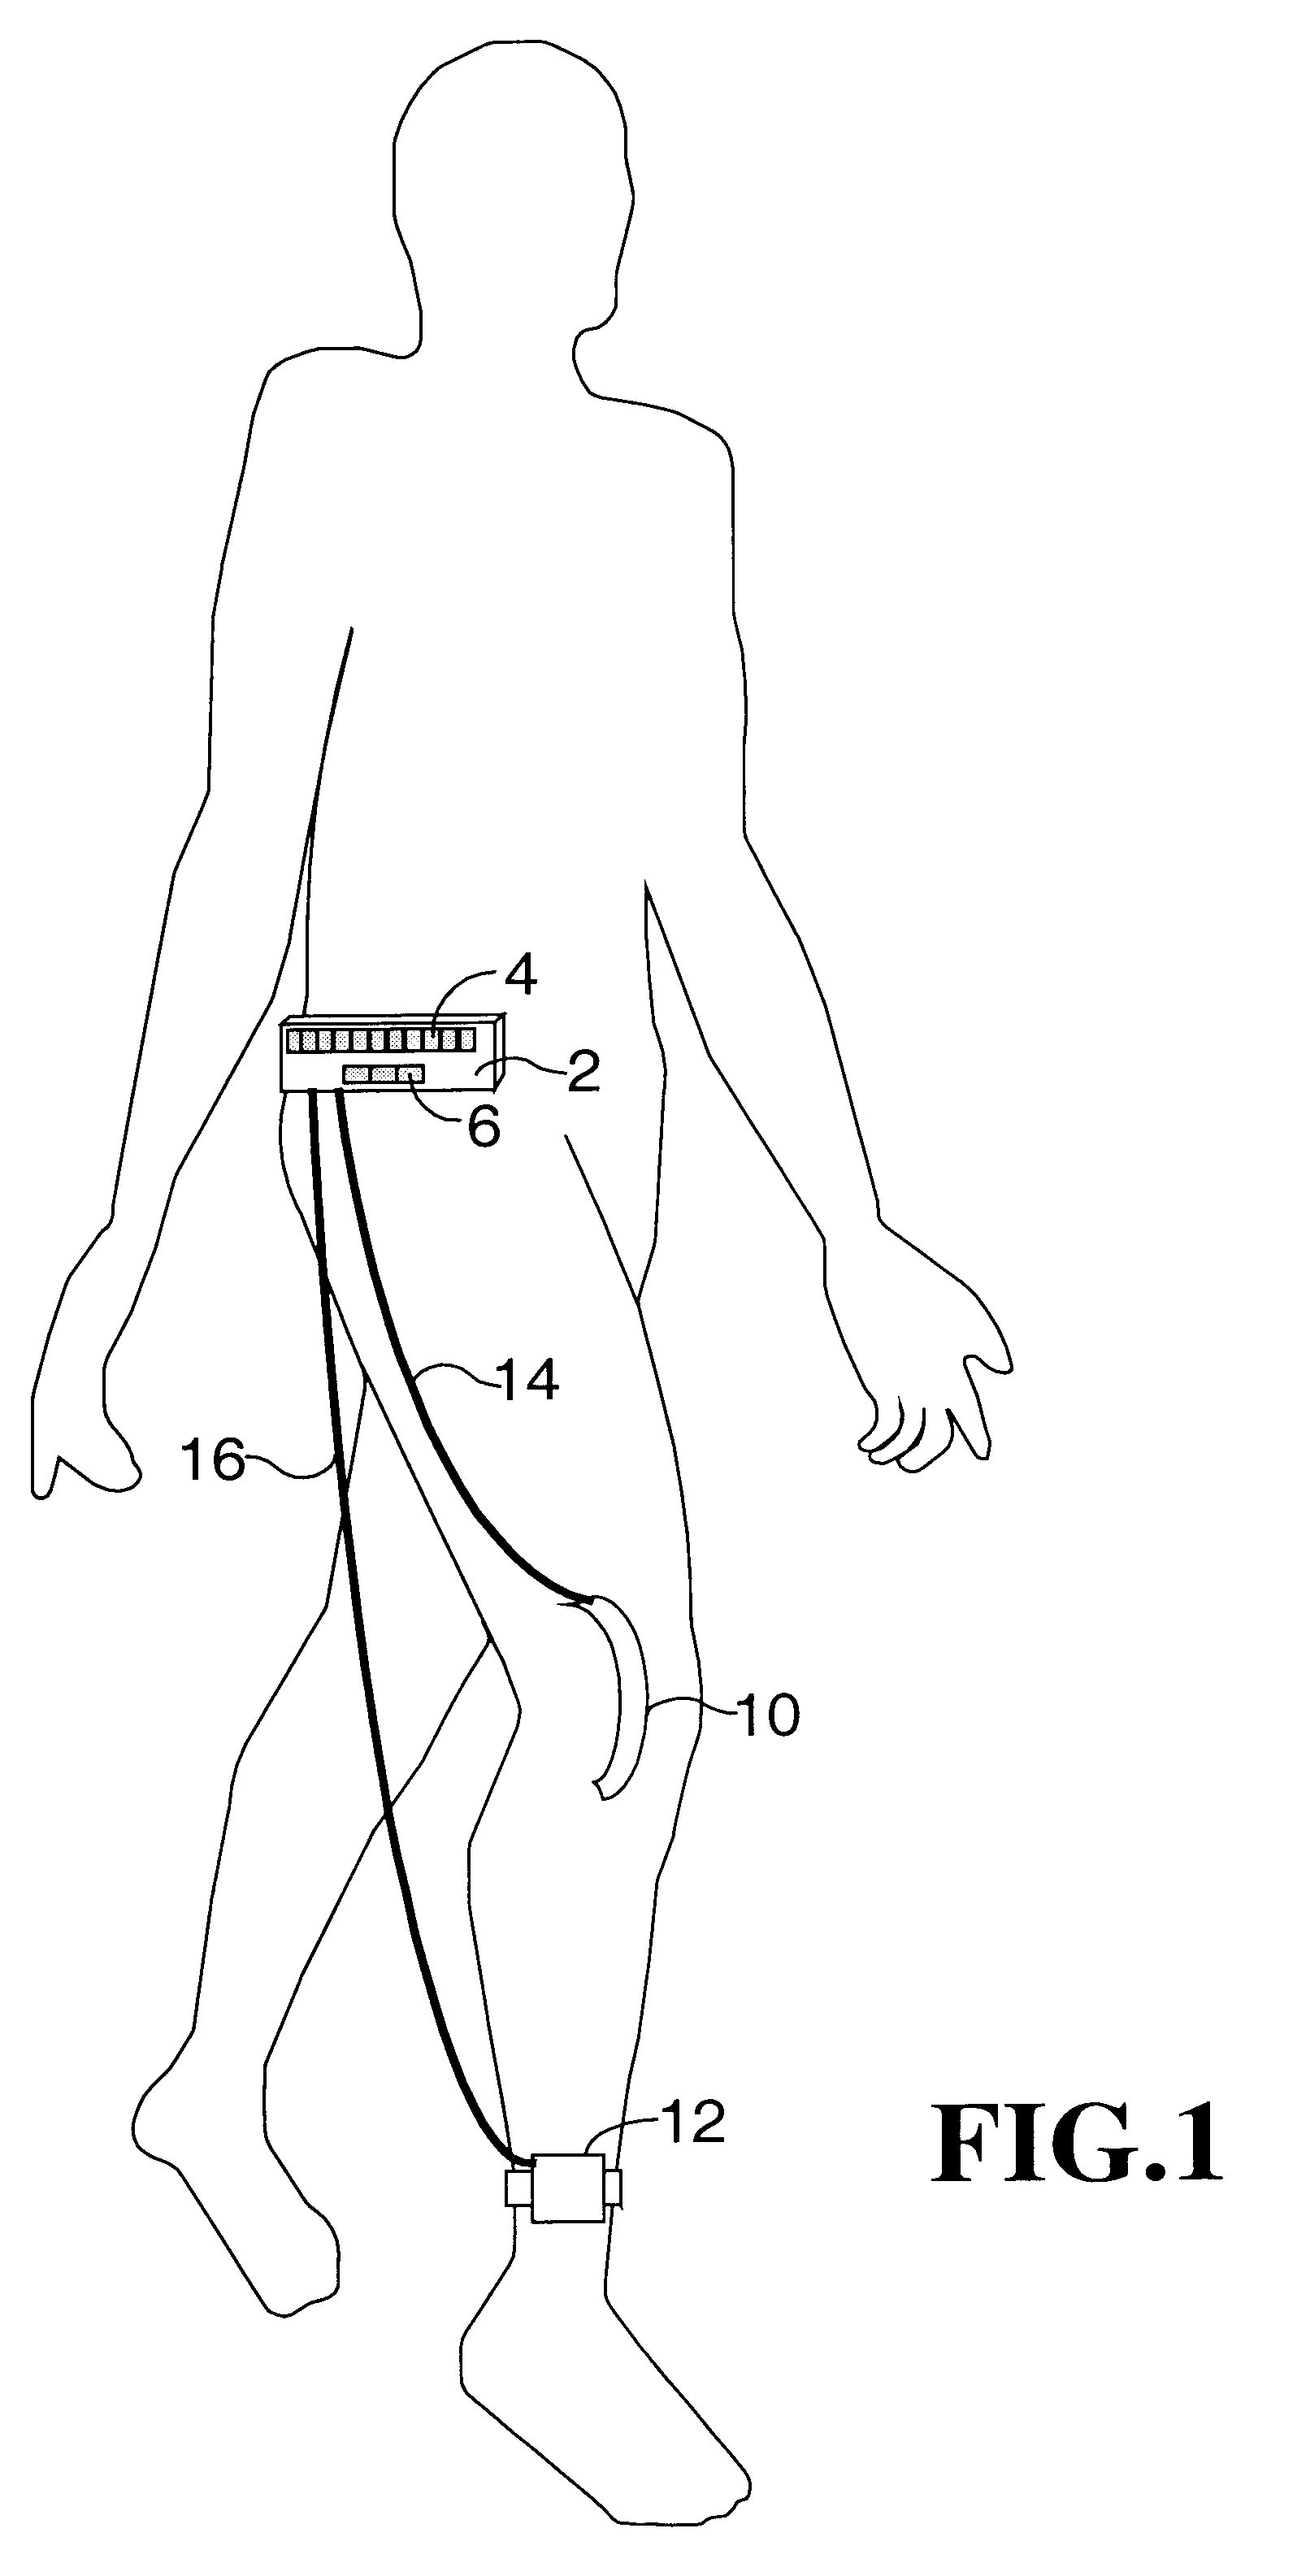 Apparatus and method for relating pain and activity of a patient